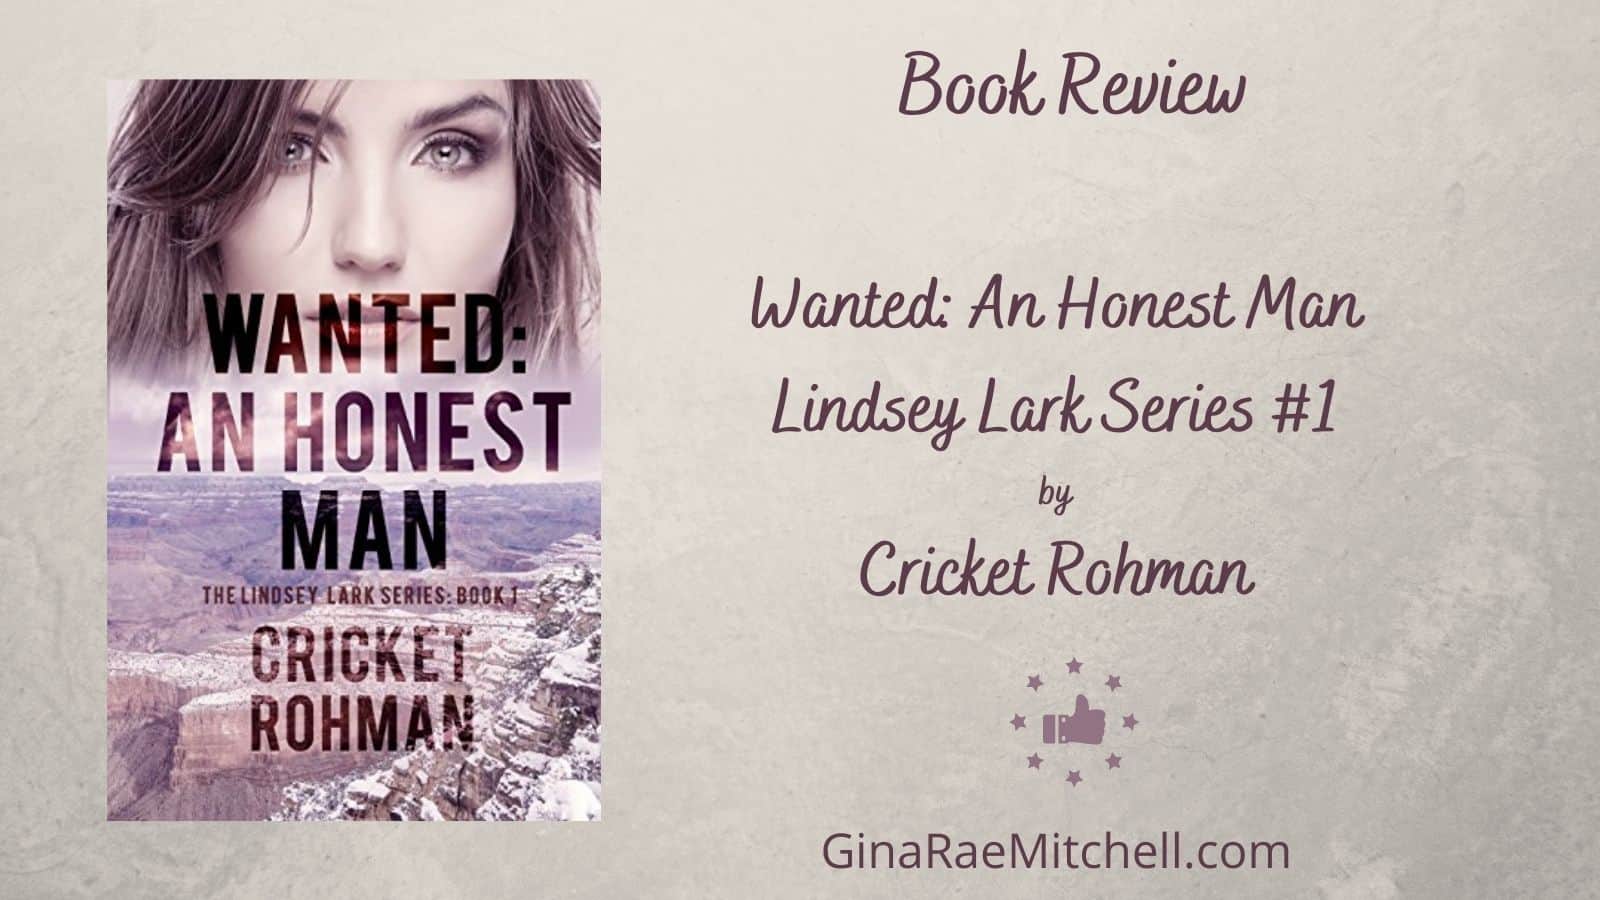 Wanted: An Honest Man by Cricket Rohman (The Lindsey Lark Series #1) | Review